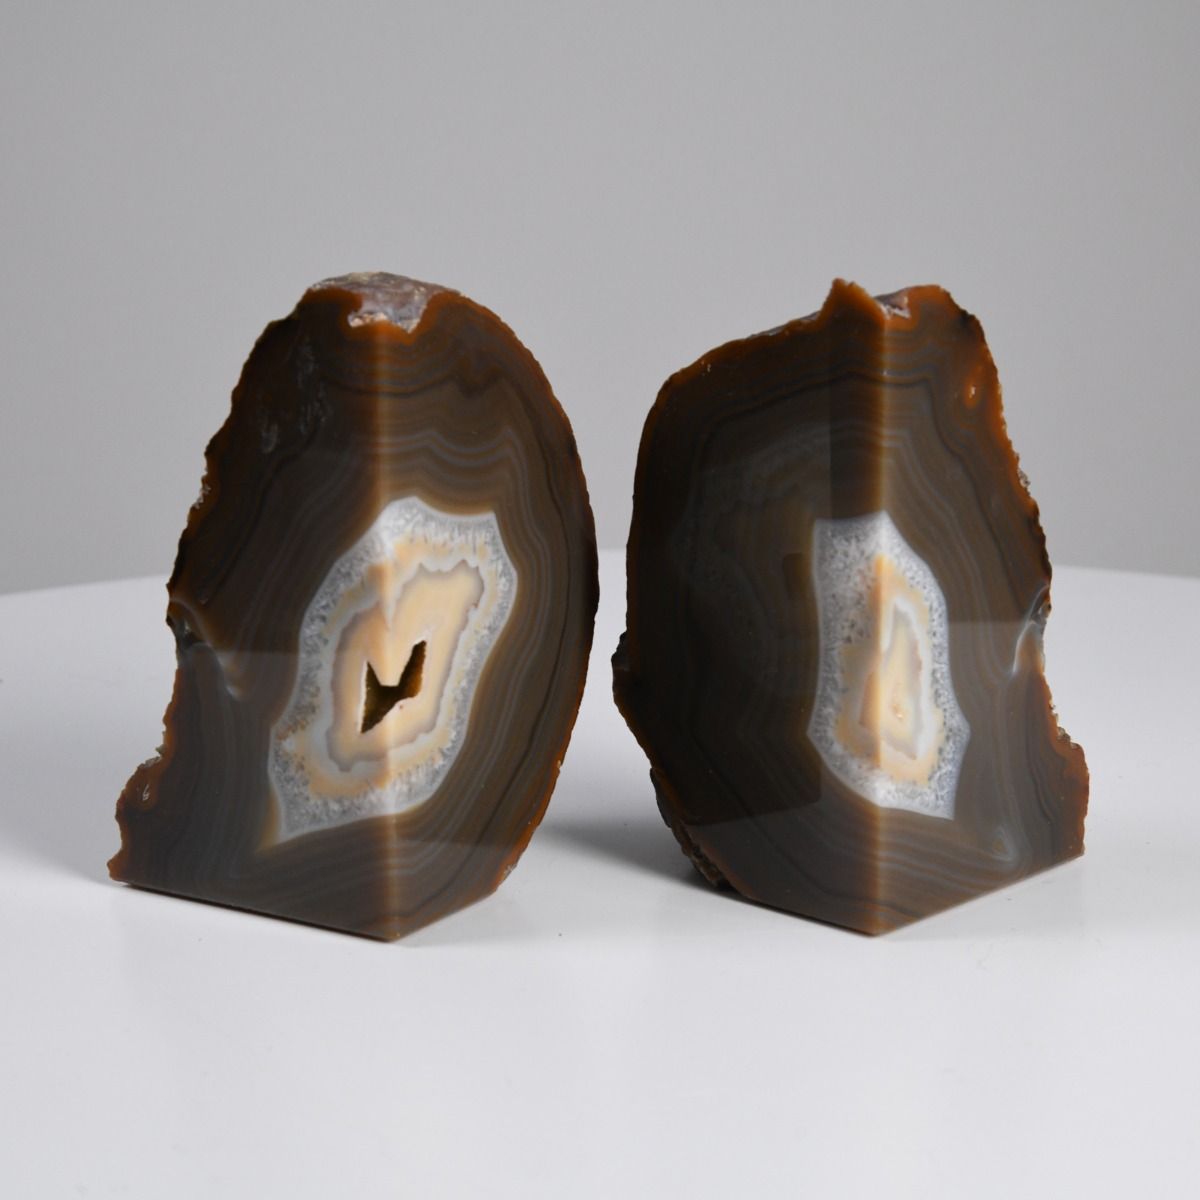 Pair of Geode Paperweights / Book-Ends